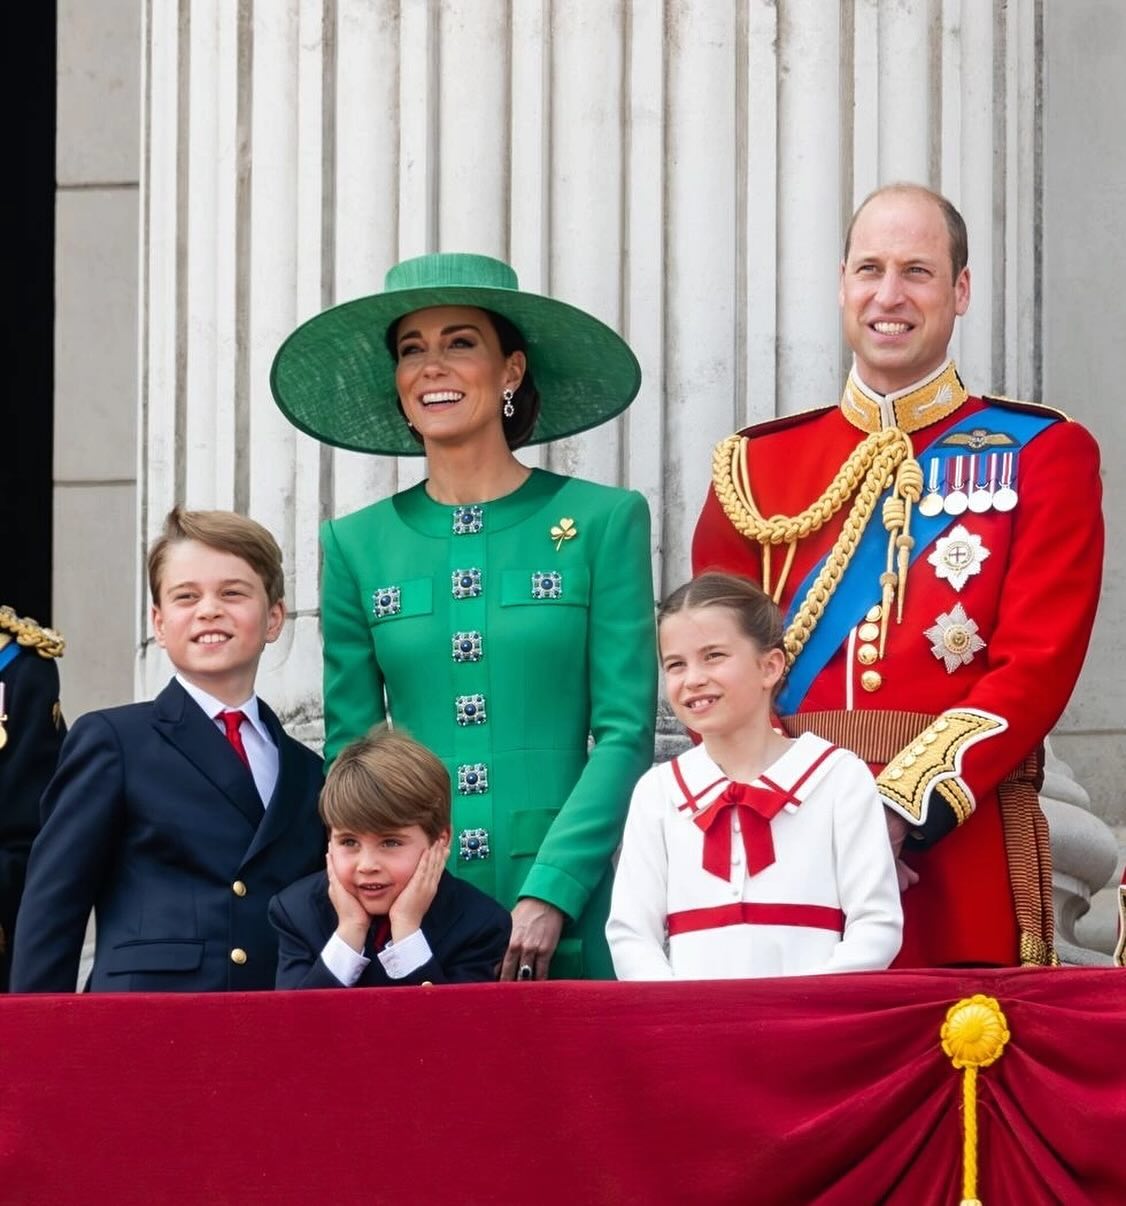 Prince William and Kate Middleton's role